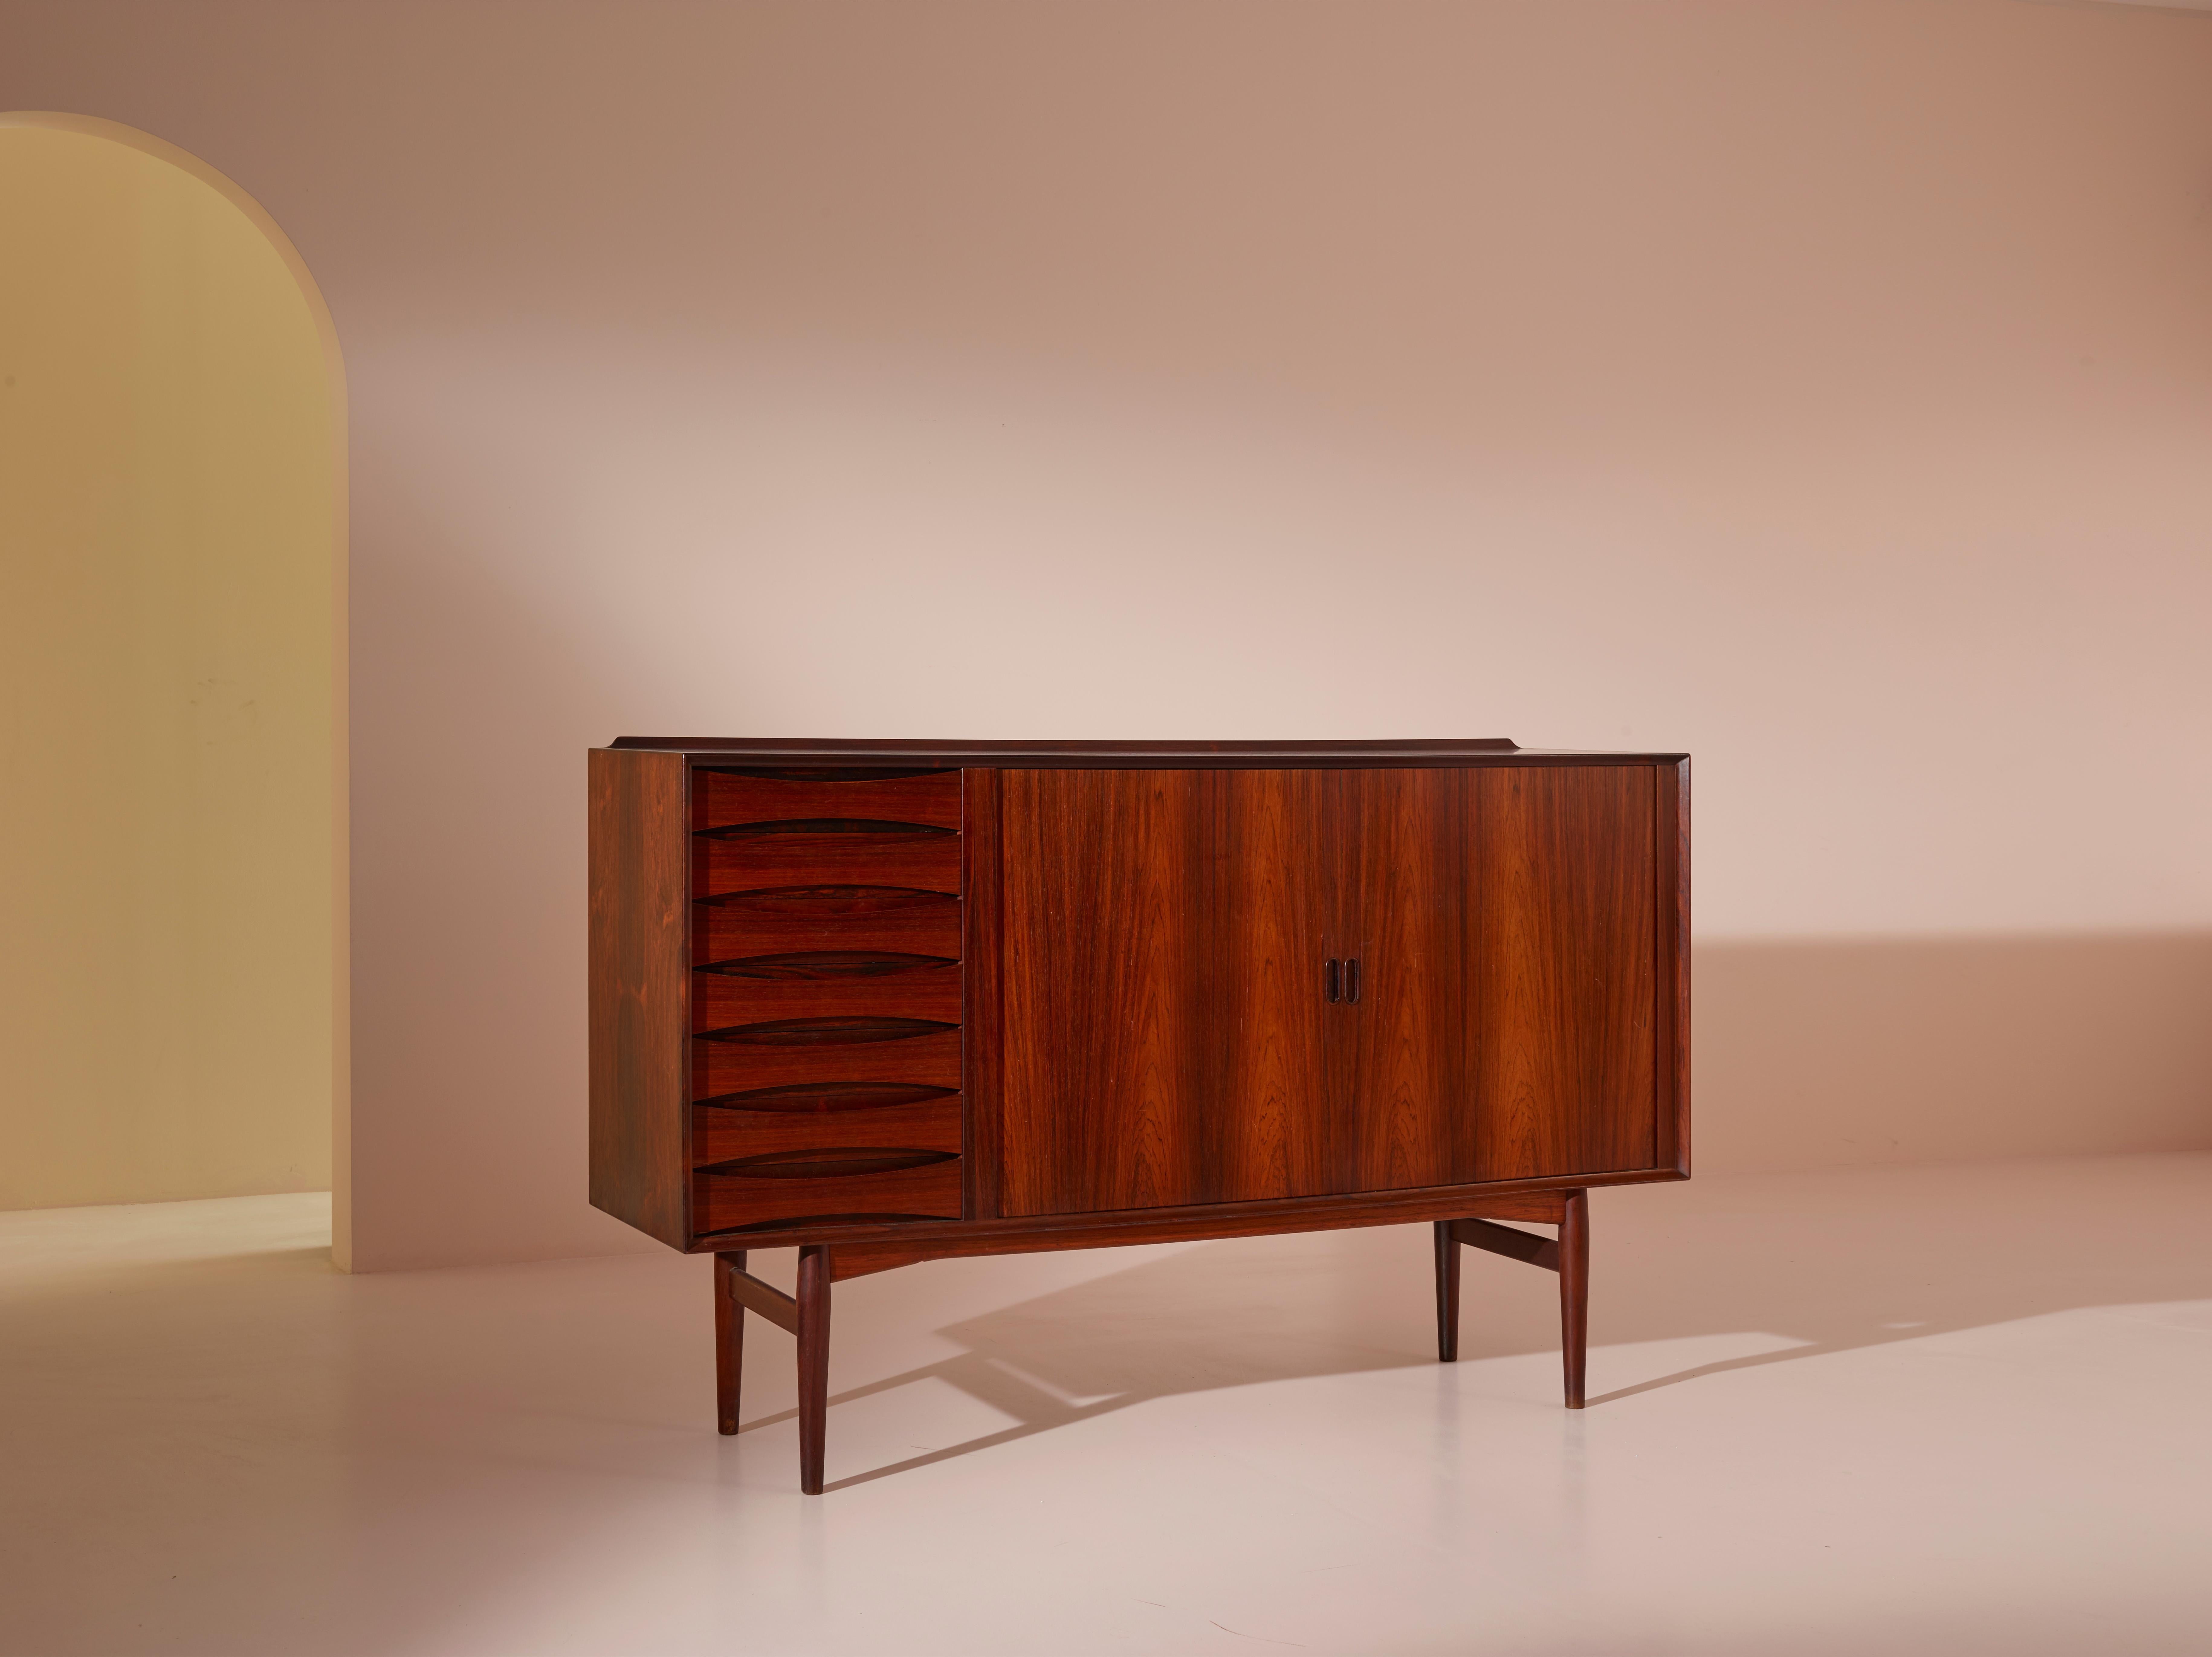 The OS63 highboard, designed by Arne Vodder for Sibast Mobler in 1958, is a beautiful and functional storage piece made of rosewood. With seven drawers on the left and tambour doors on the right, this credenza provides ample storage space while